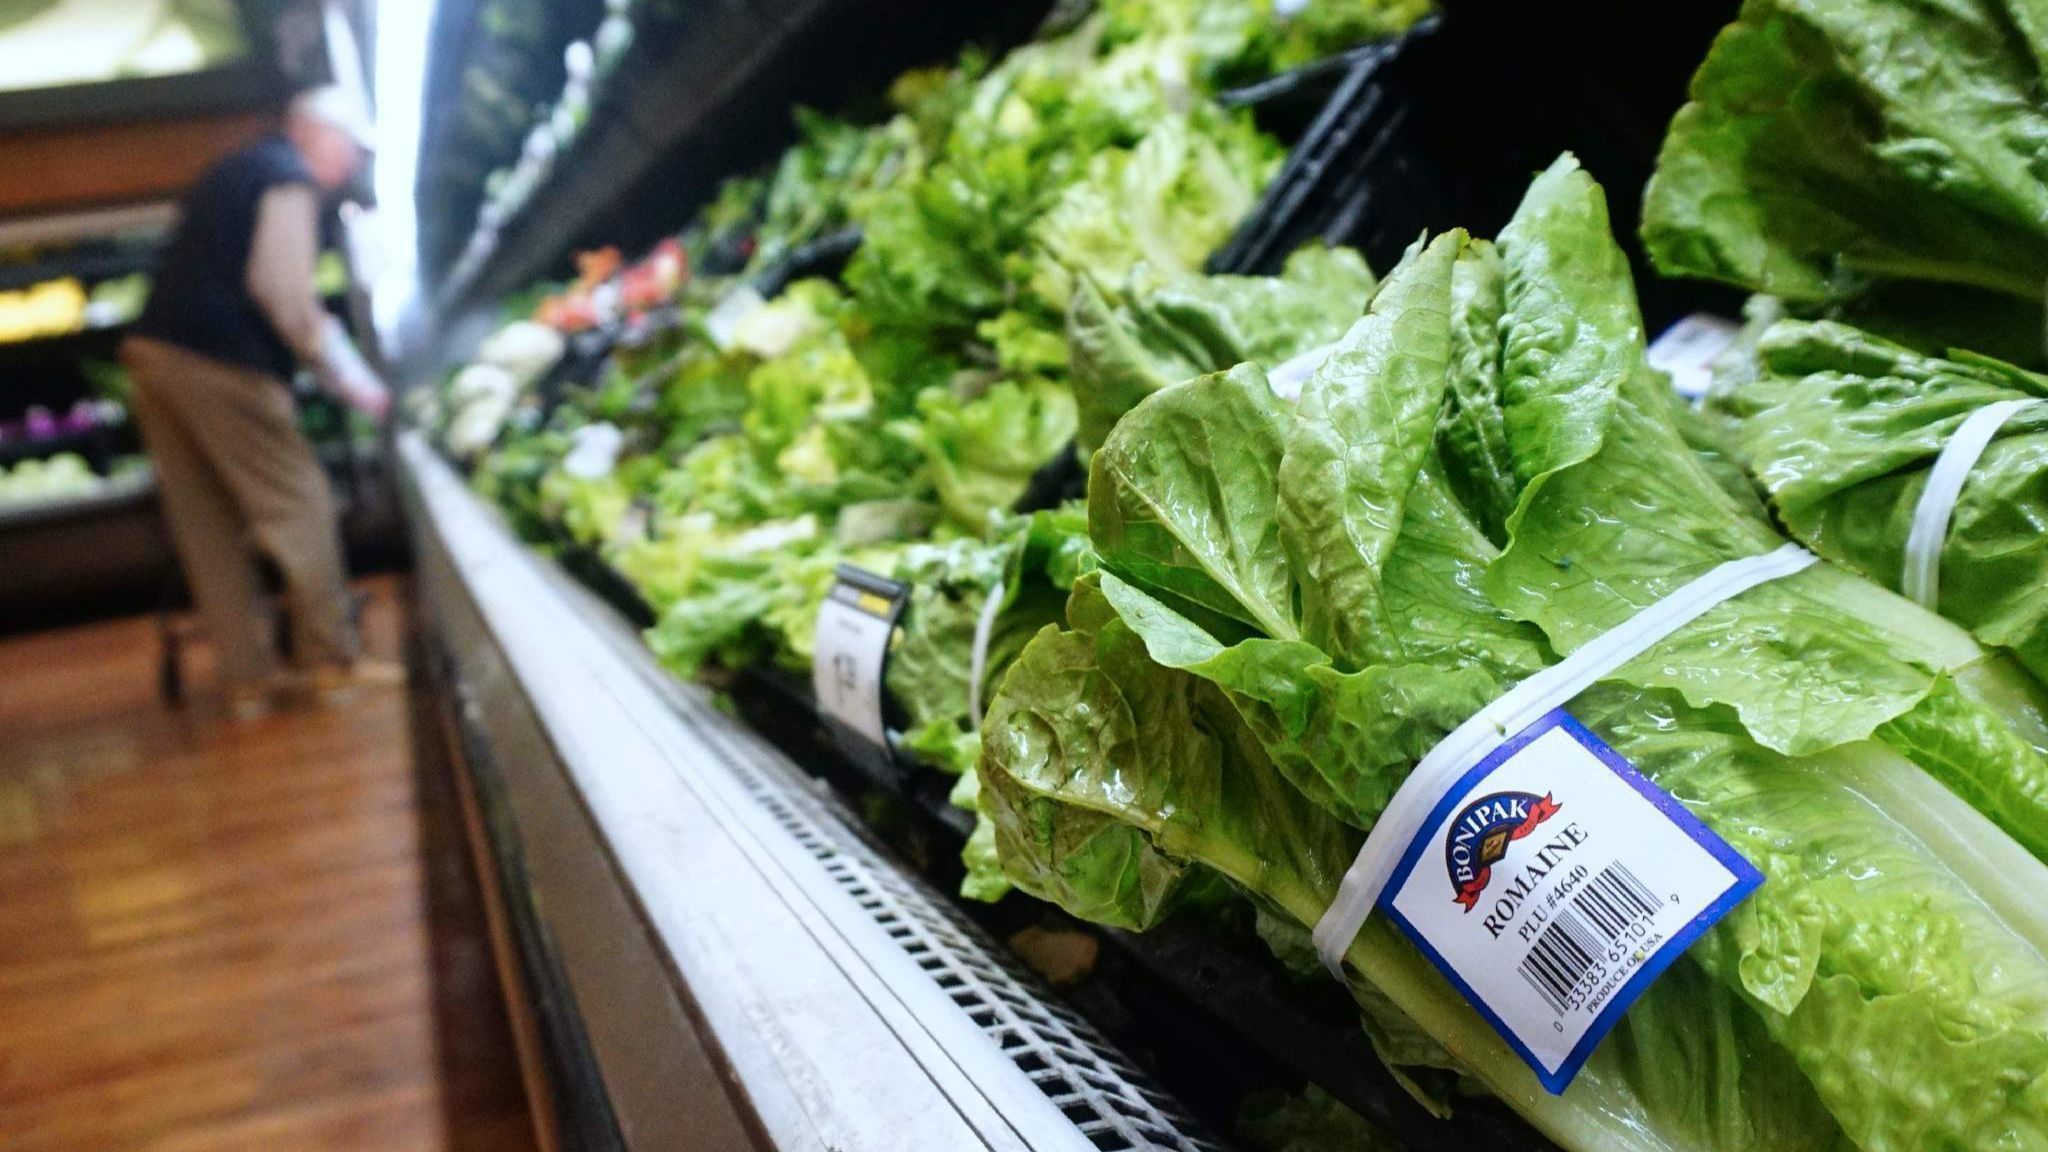 There's Been Another Recall For Romaine Lettuce By The CDC